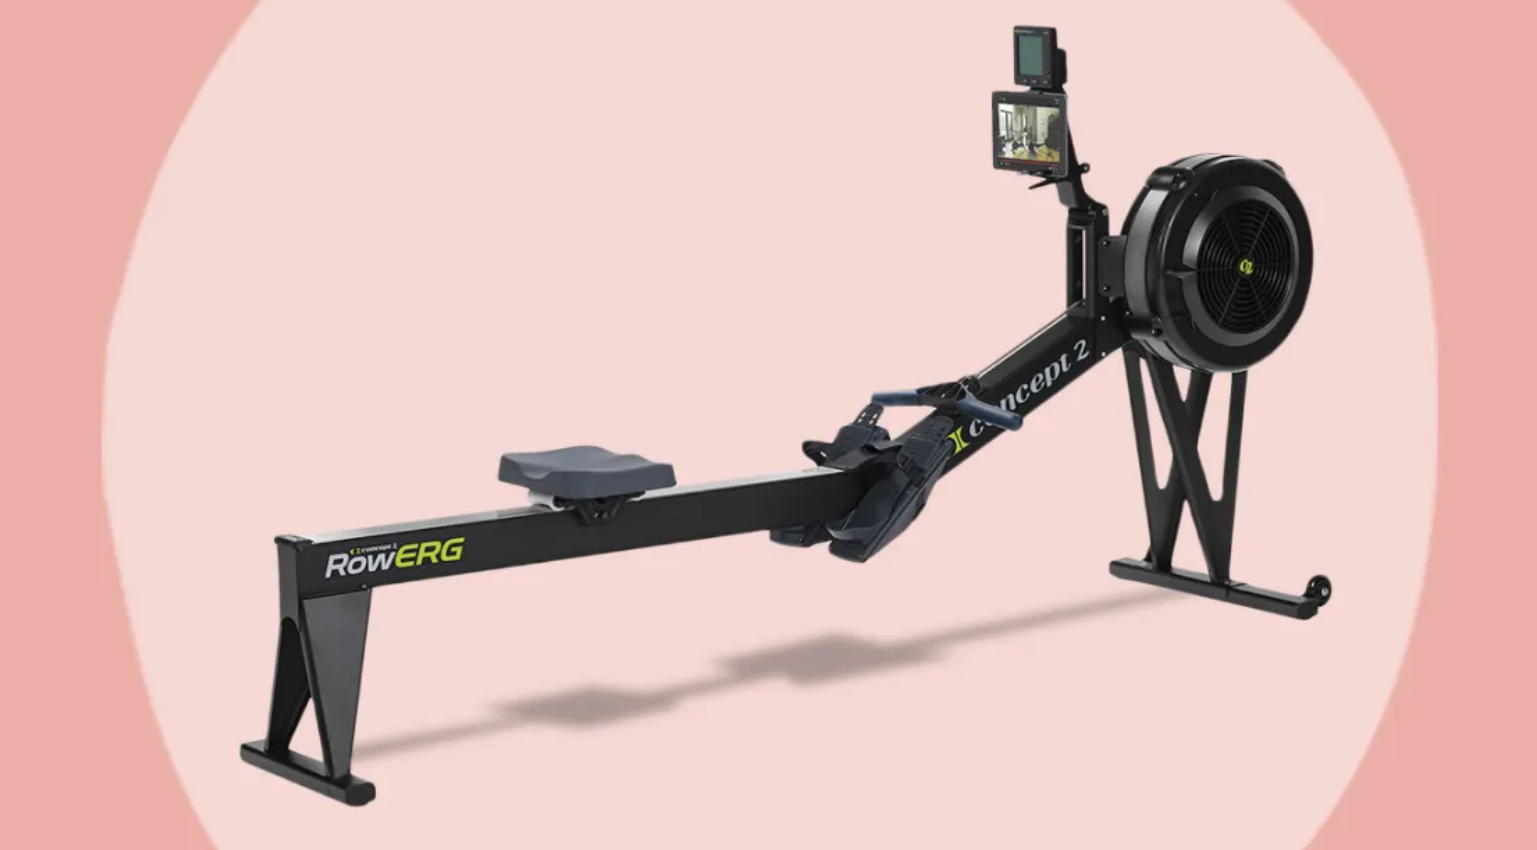 Rower is easy to assemble compared to tall Concept 2 Skierg